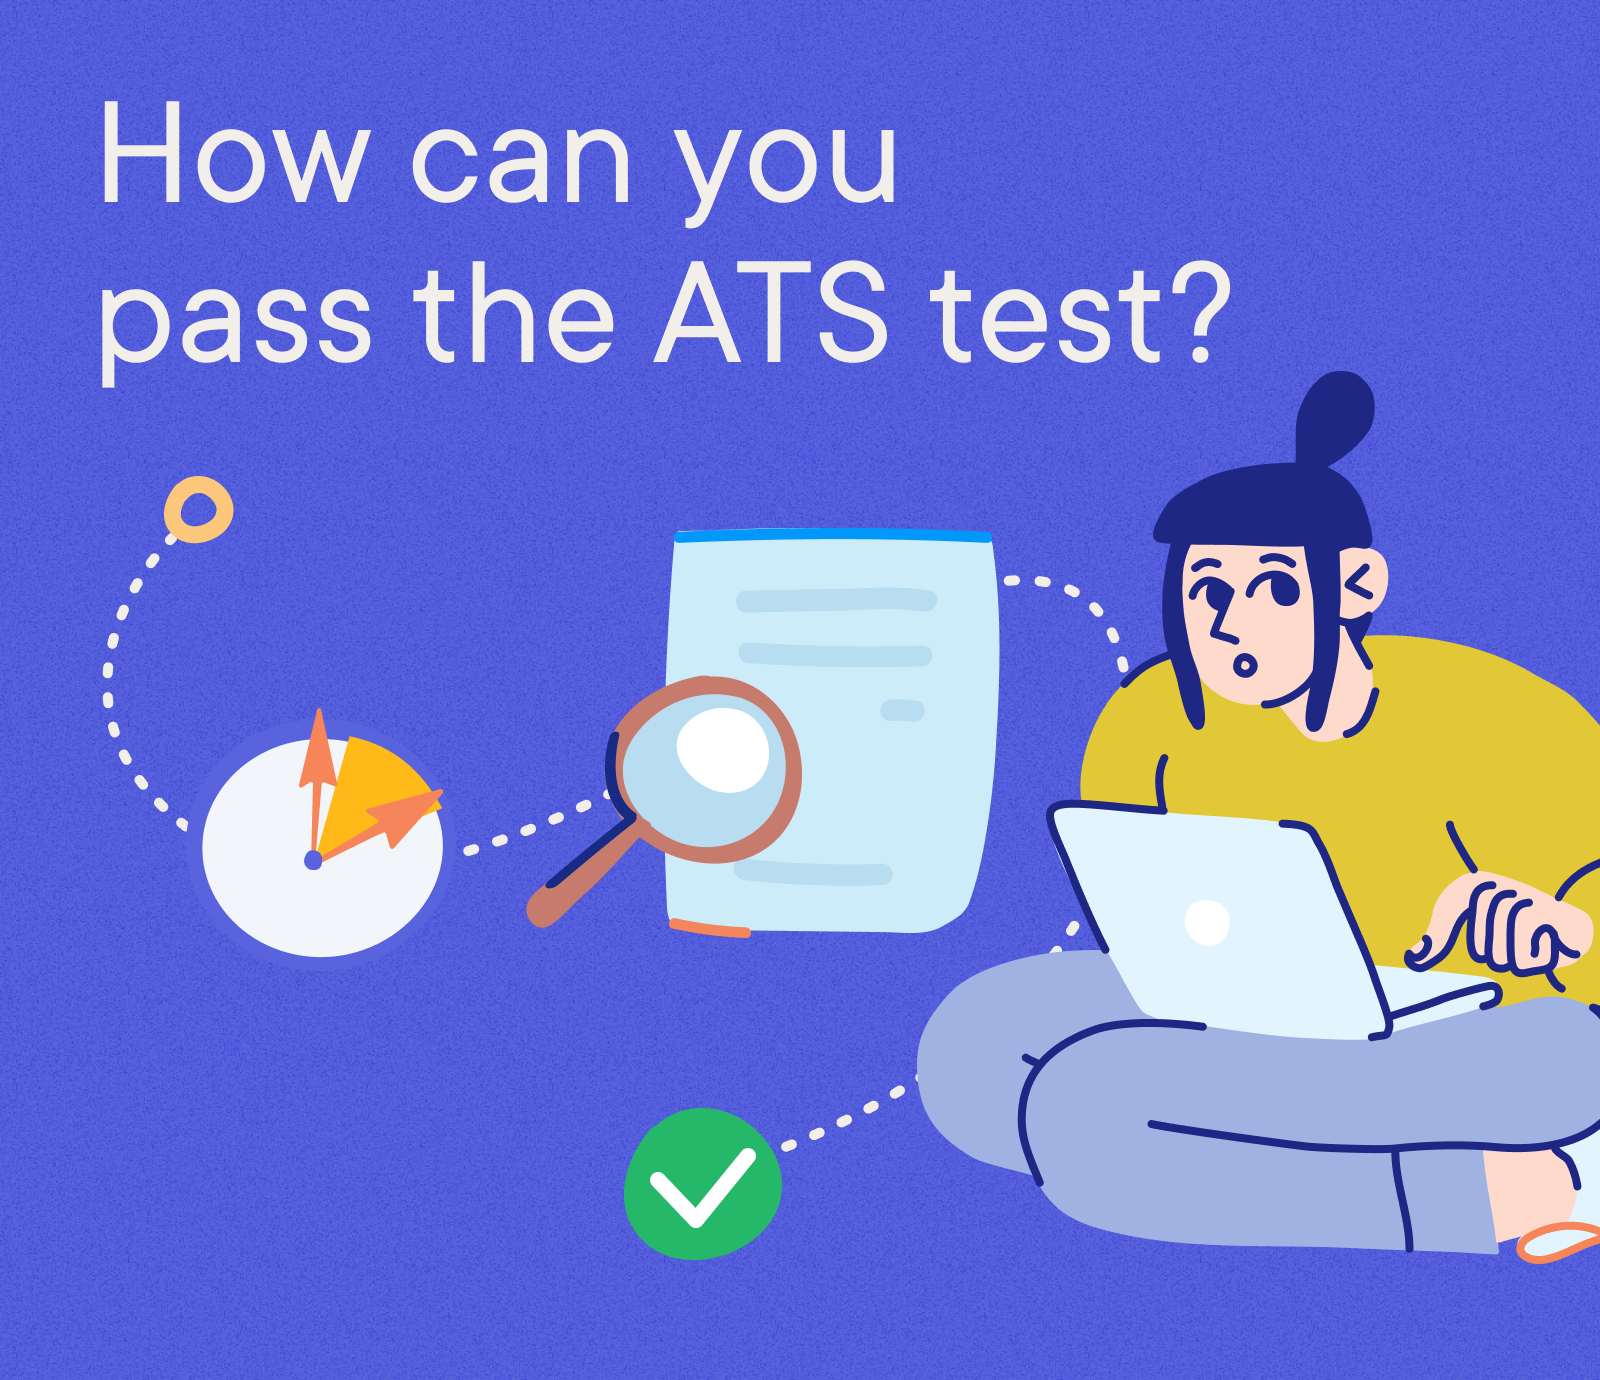 Human Resources - How can you pass the ATS test?